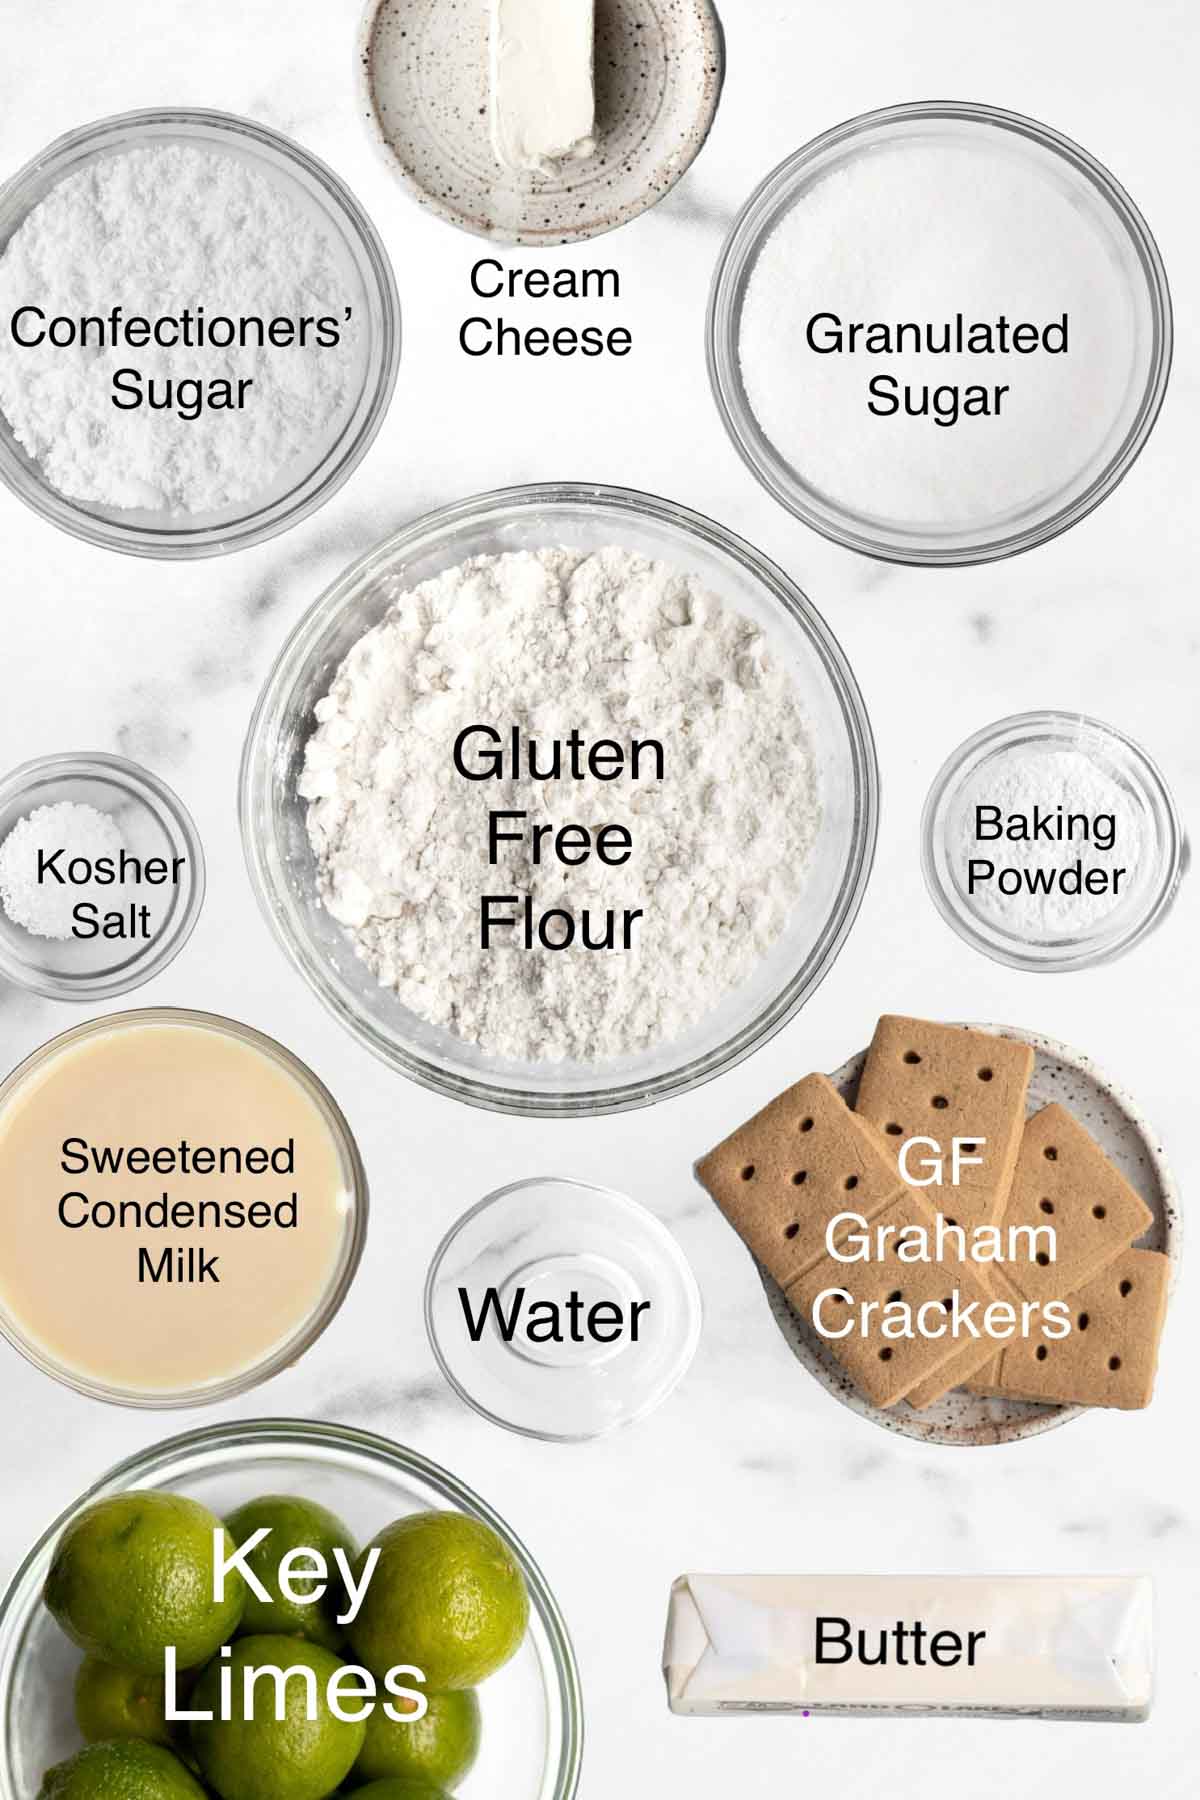 Confectioners' sugar, cream cheese, sugar, kosher salt, gluten free flour, baking powder, sweetened condensed milk, water, graham crackers, key limes, and butter in separate containers.